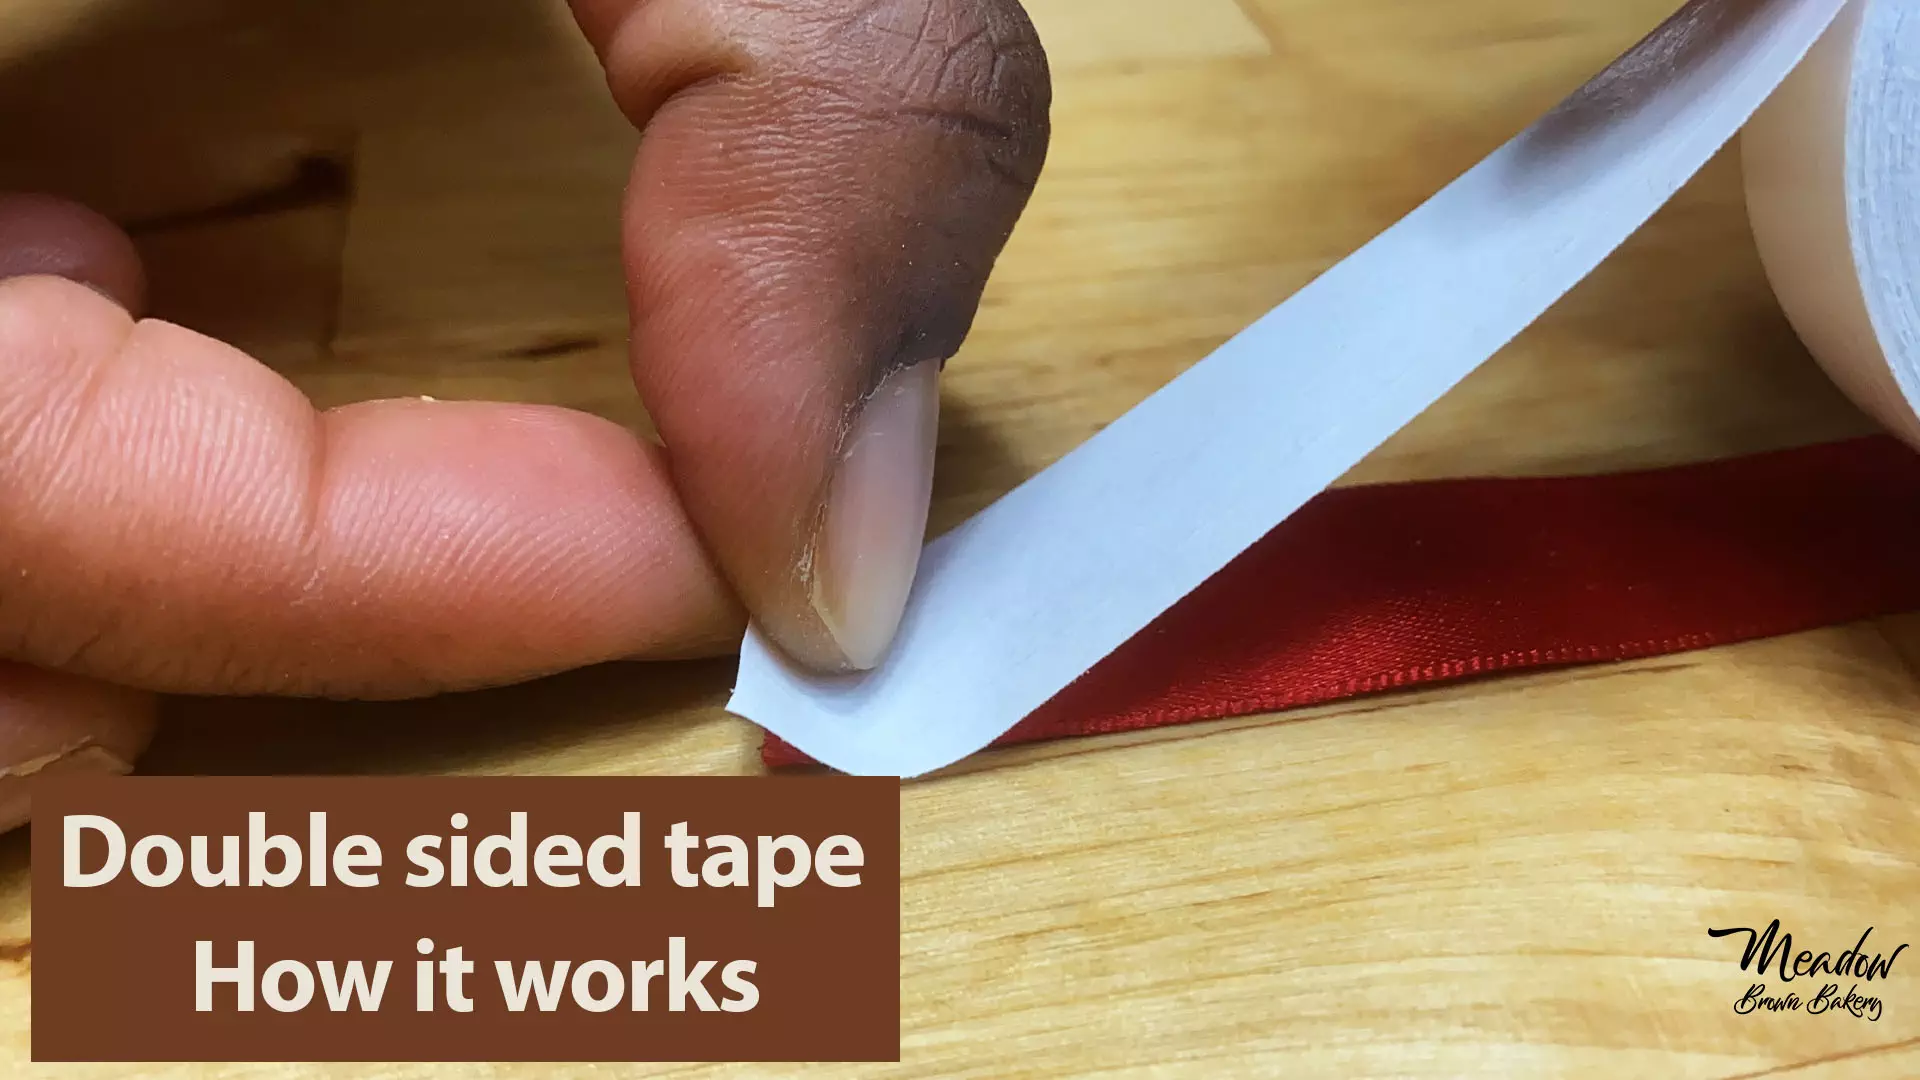 How does double sided tape work